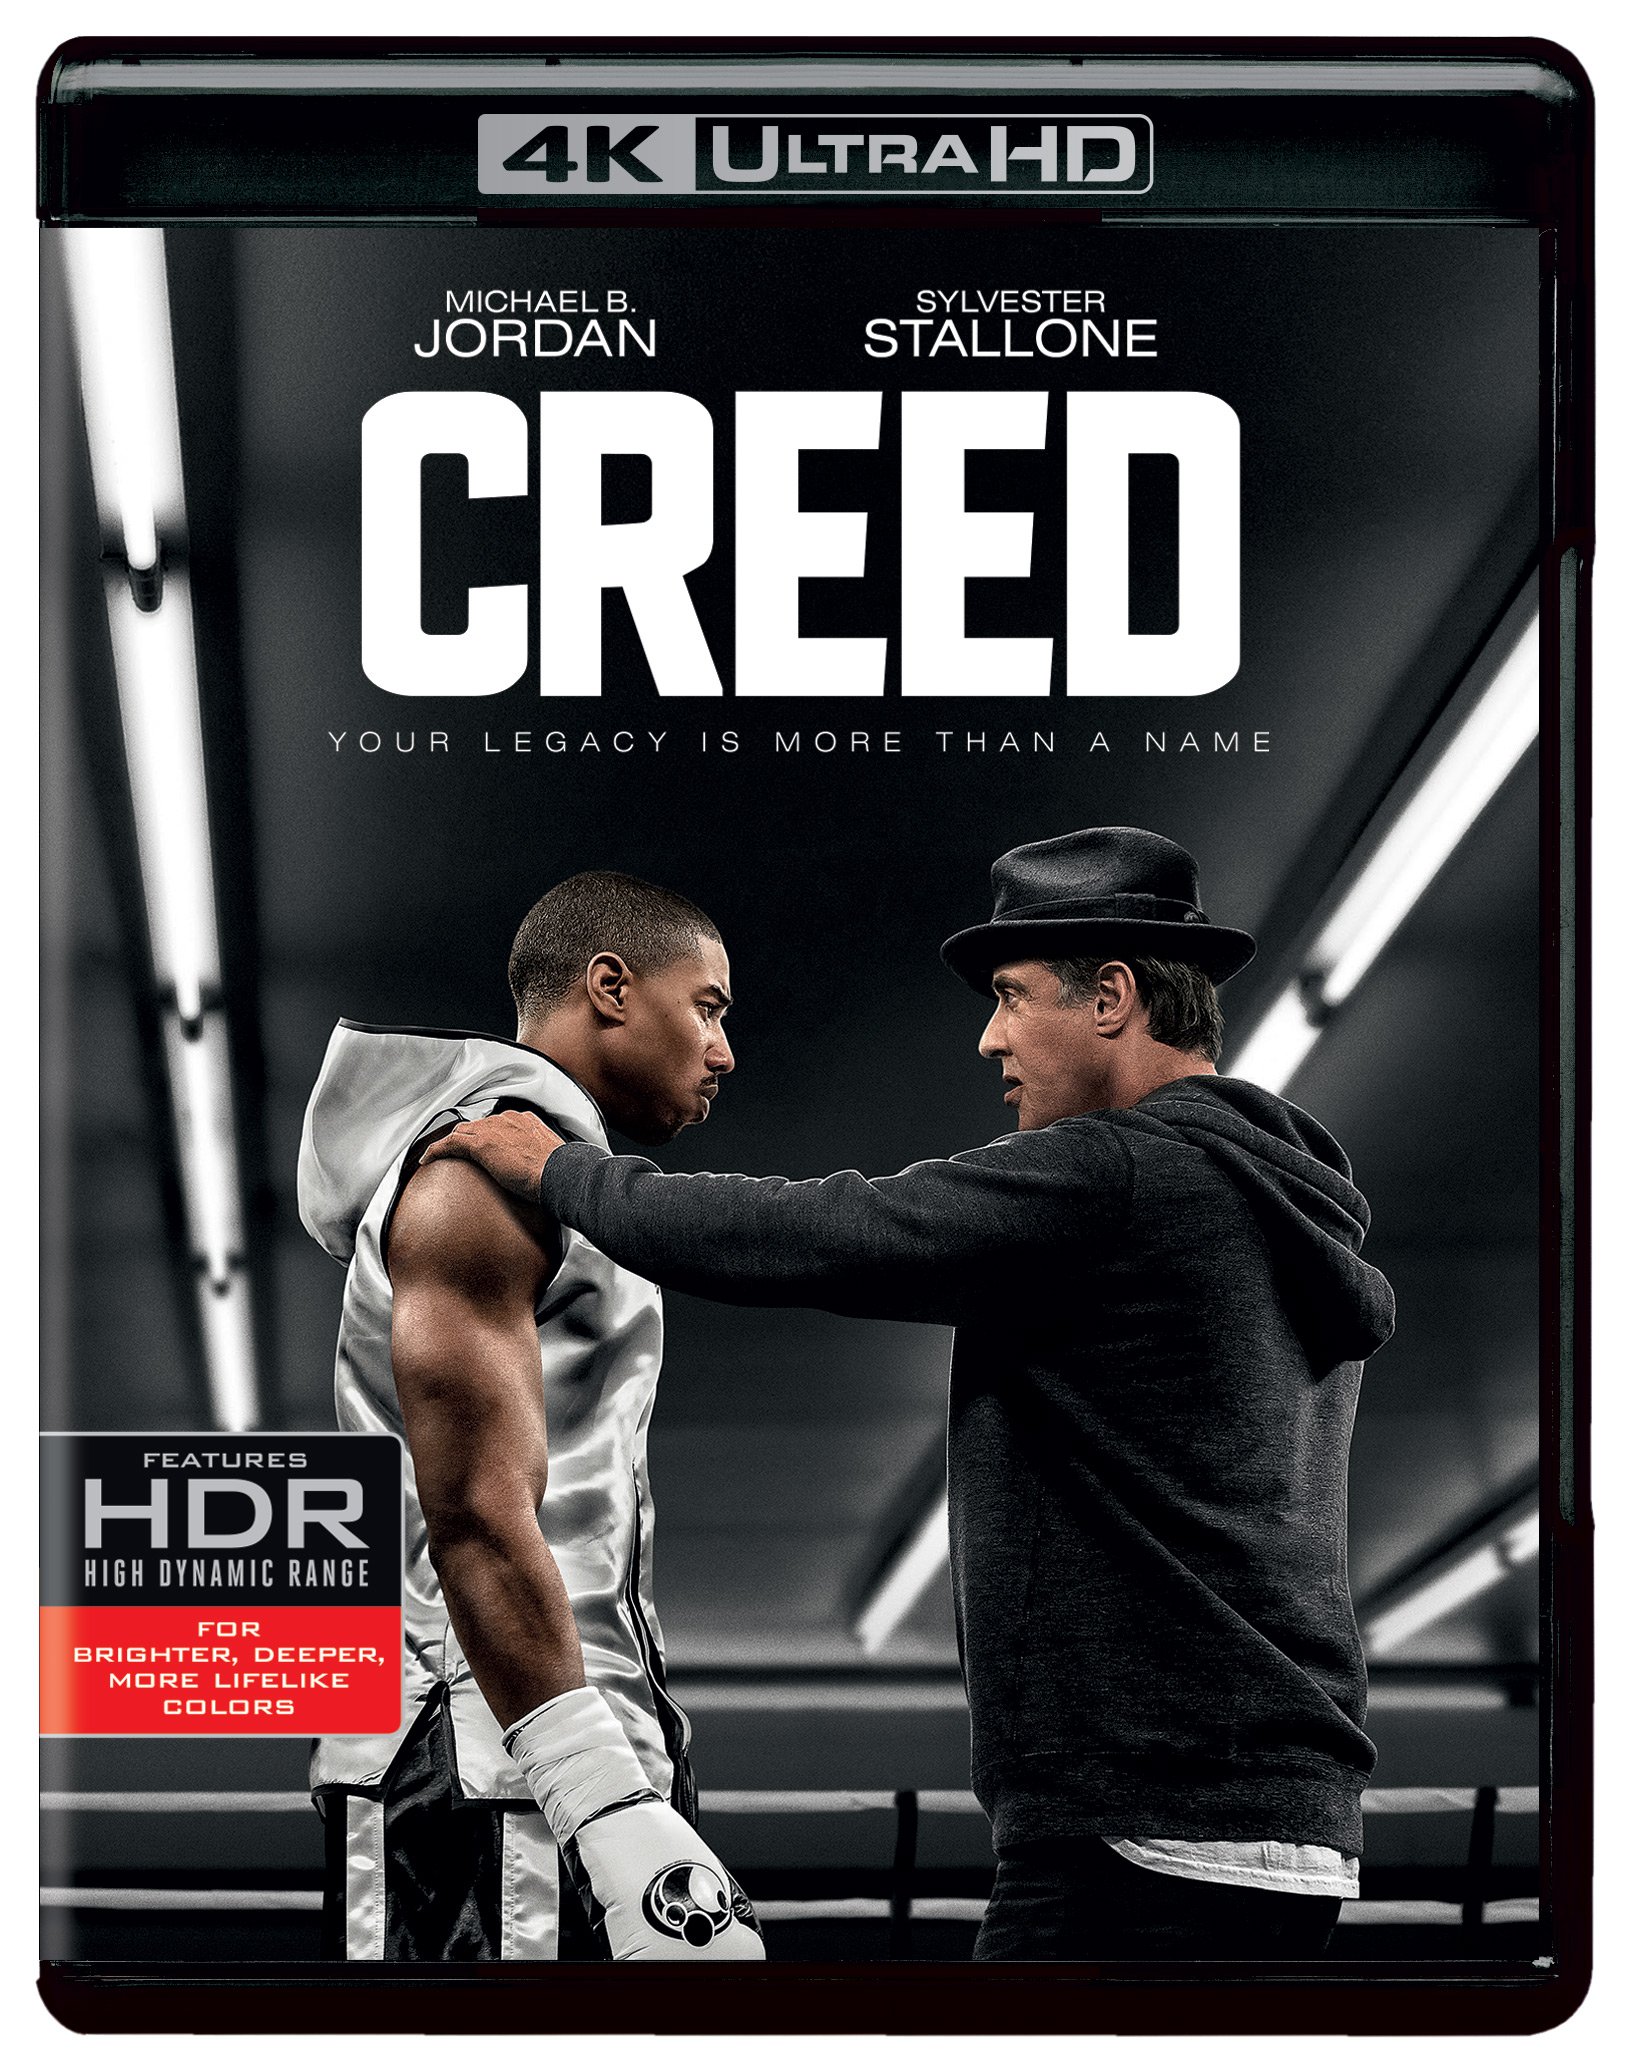 creed-4k-uhd-hd-movie-purchase-or-watch-online